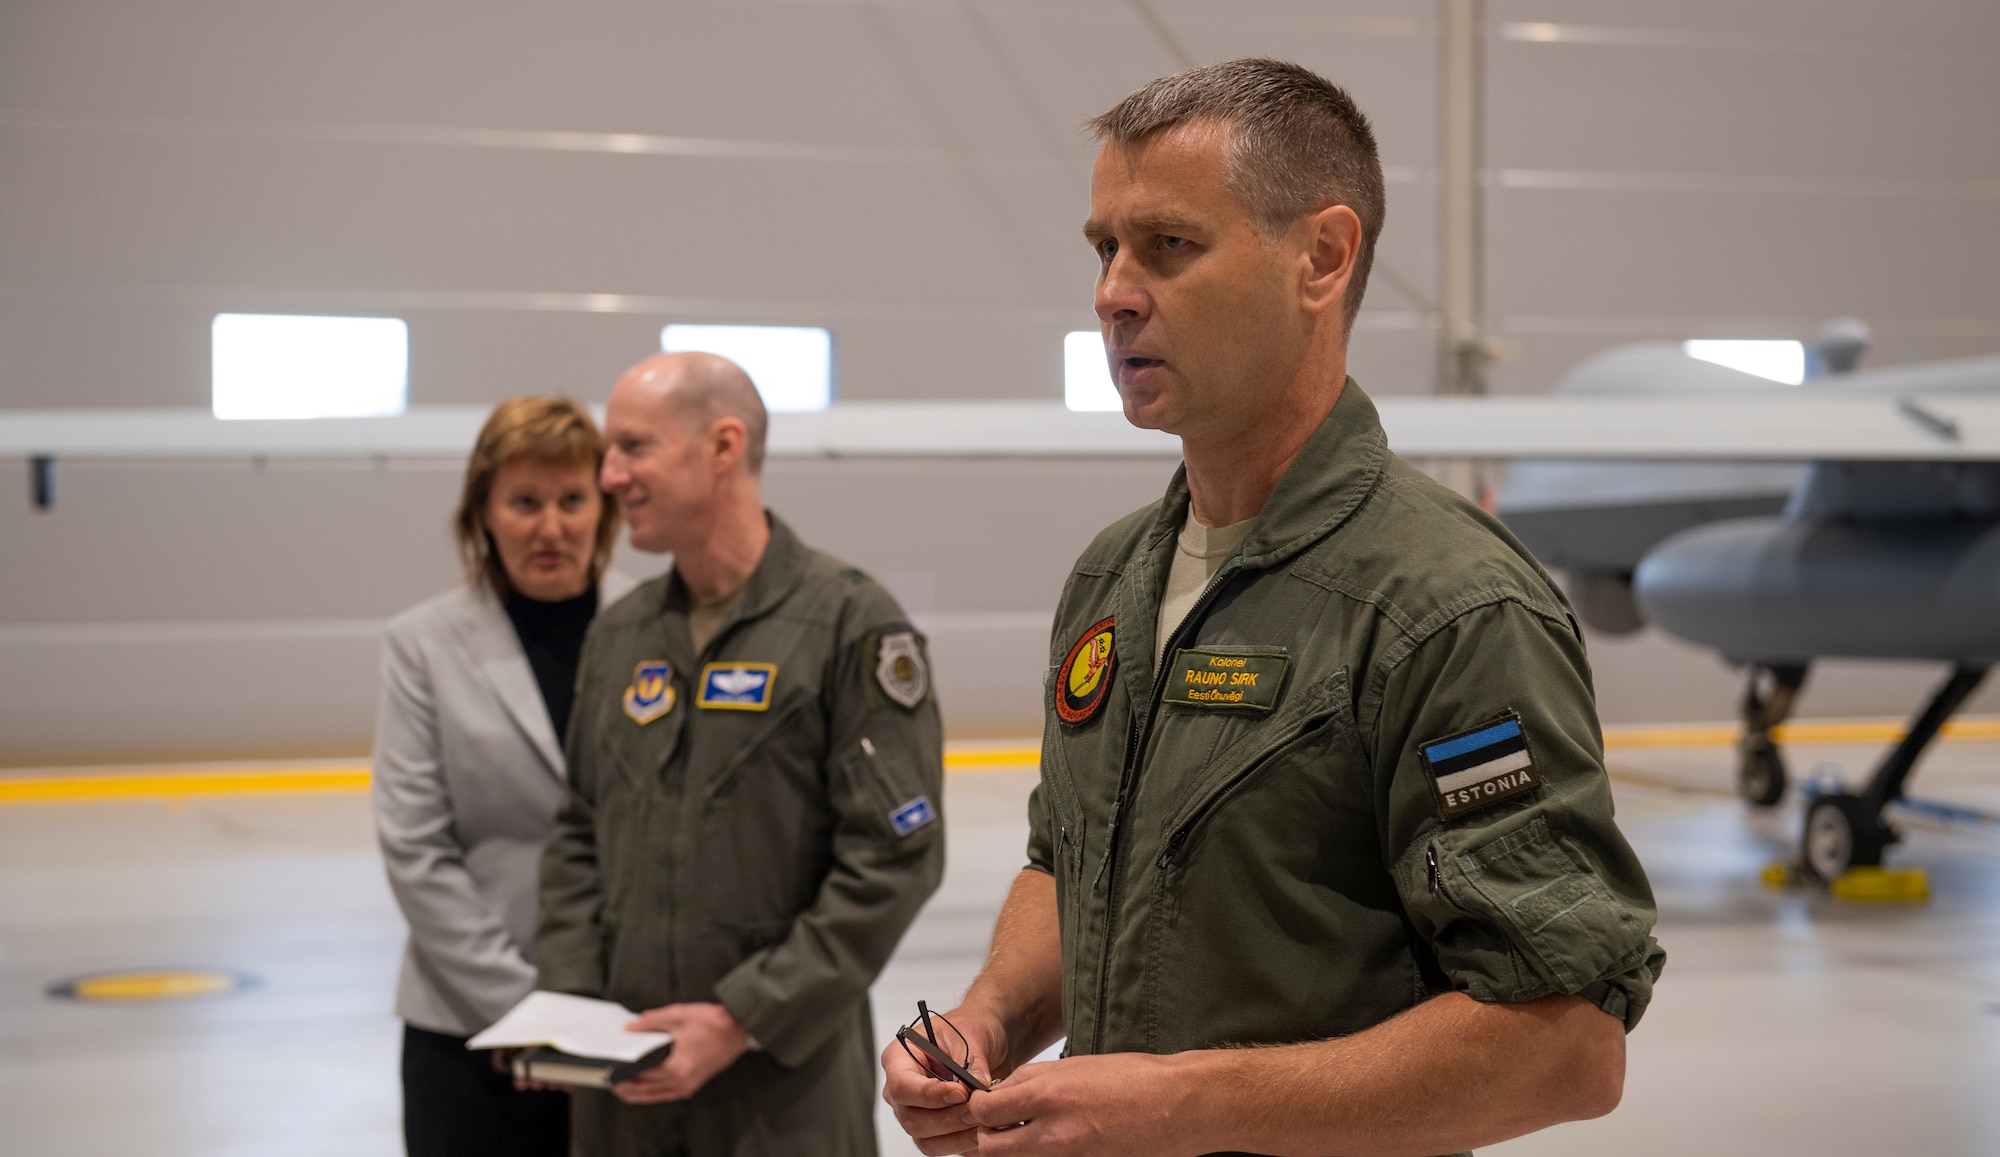 Colonel Rauno Sirk, commander of the Estonian air force, addresses Estonian media at Amari Air Base, Estonia, July 1, 2020. Sirk attended a media day at Amari AB alongside U.S. Air Force Brig. Gen Jason Hinds, Deputy Director of Operations, Strategic Deterrence and Nuclear Integration and the United States Air Forces in Europe and United States Air Forces Africa Air Operations Center Director, to discuss the MQ-9 Reaper's deployment to Estonia. The United States and Estonia must preserve our mutual commitment and
trust in each other as we face emerging malignant forces and evolving strategic challenges. (U.S. Air Force photo by Airman 1st Class Alison Stewart)